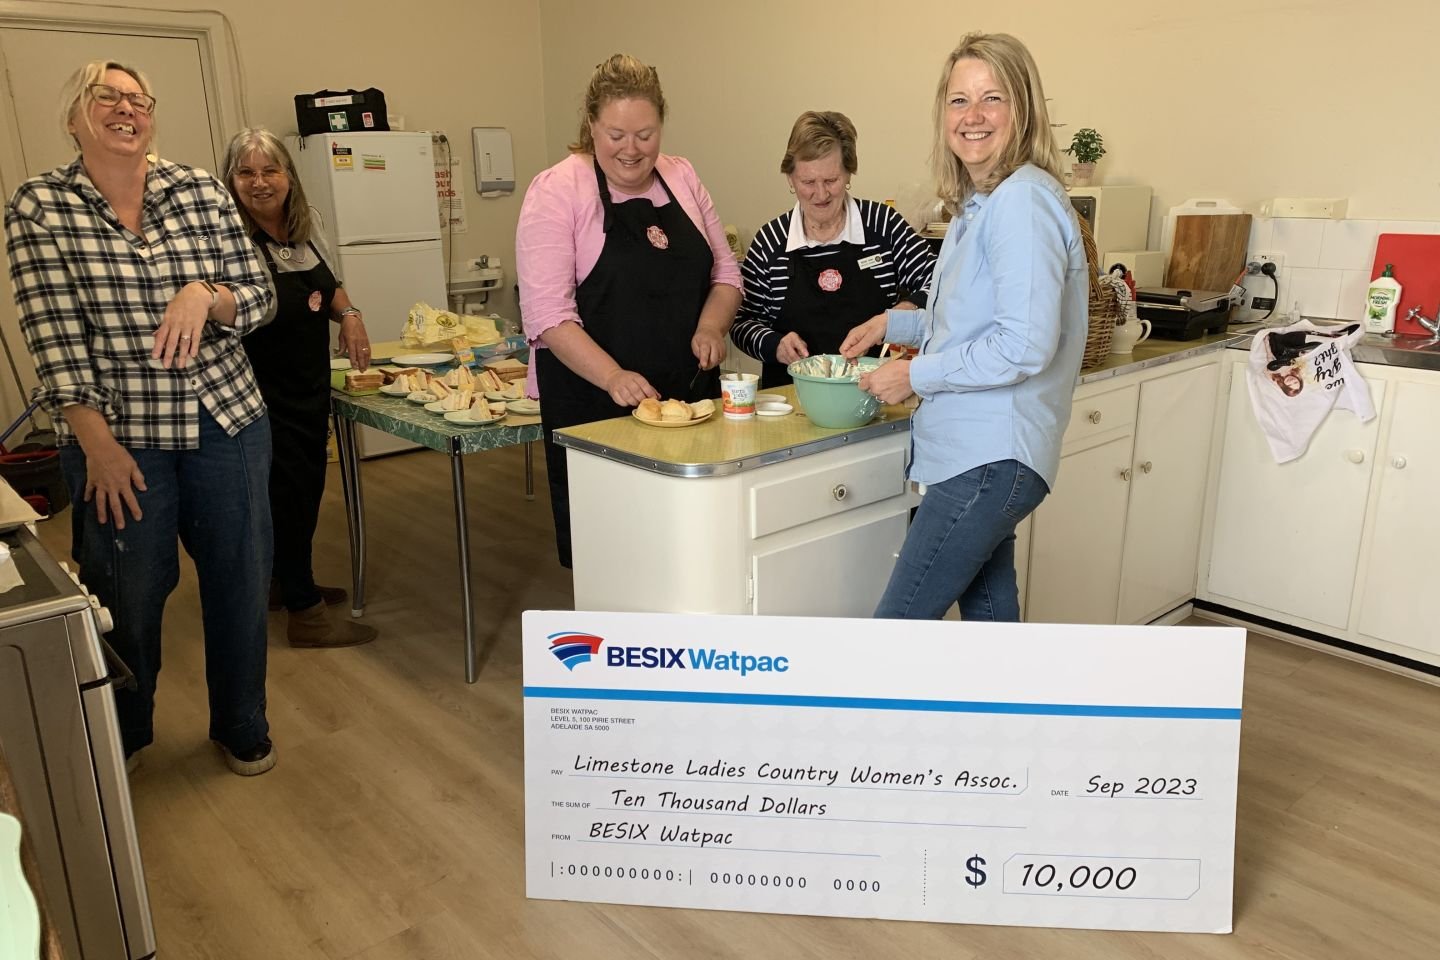 Limestone Ladies Country Women's Association preparing meals for the 2023 Naracoorte Show in the kitchen set for renovation with BESIX Watpac's generous $10,000 donation.